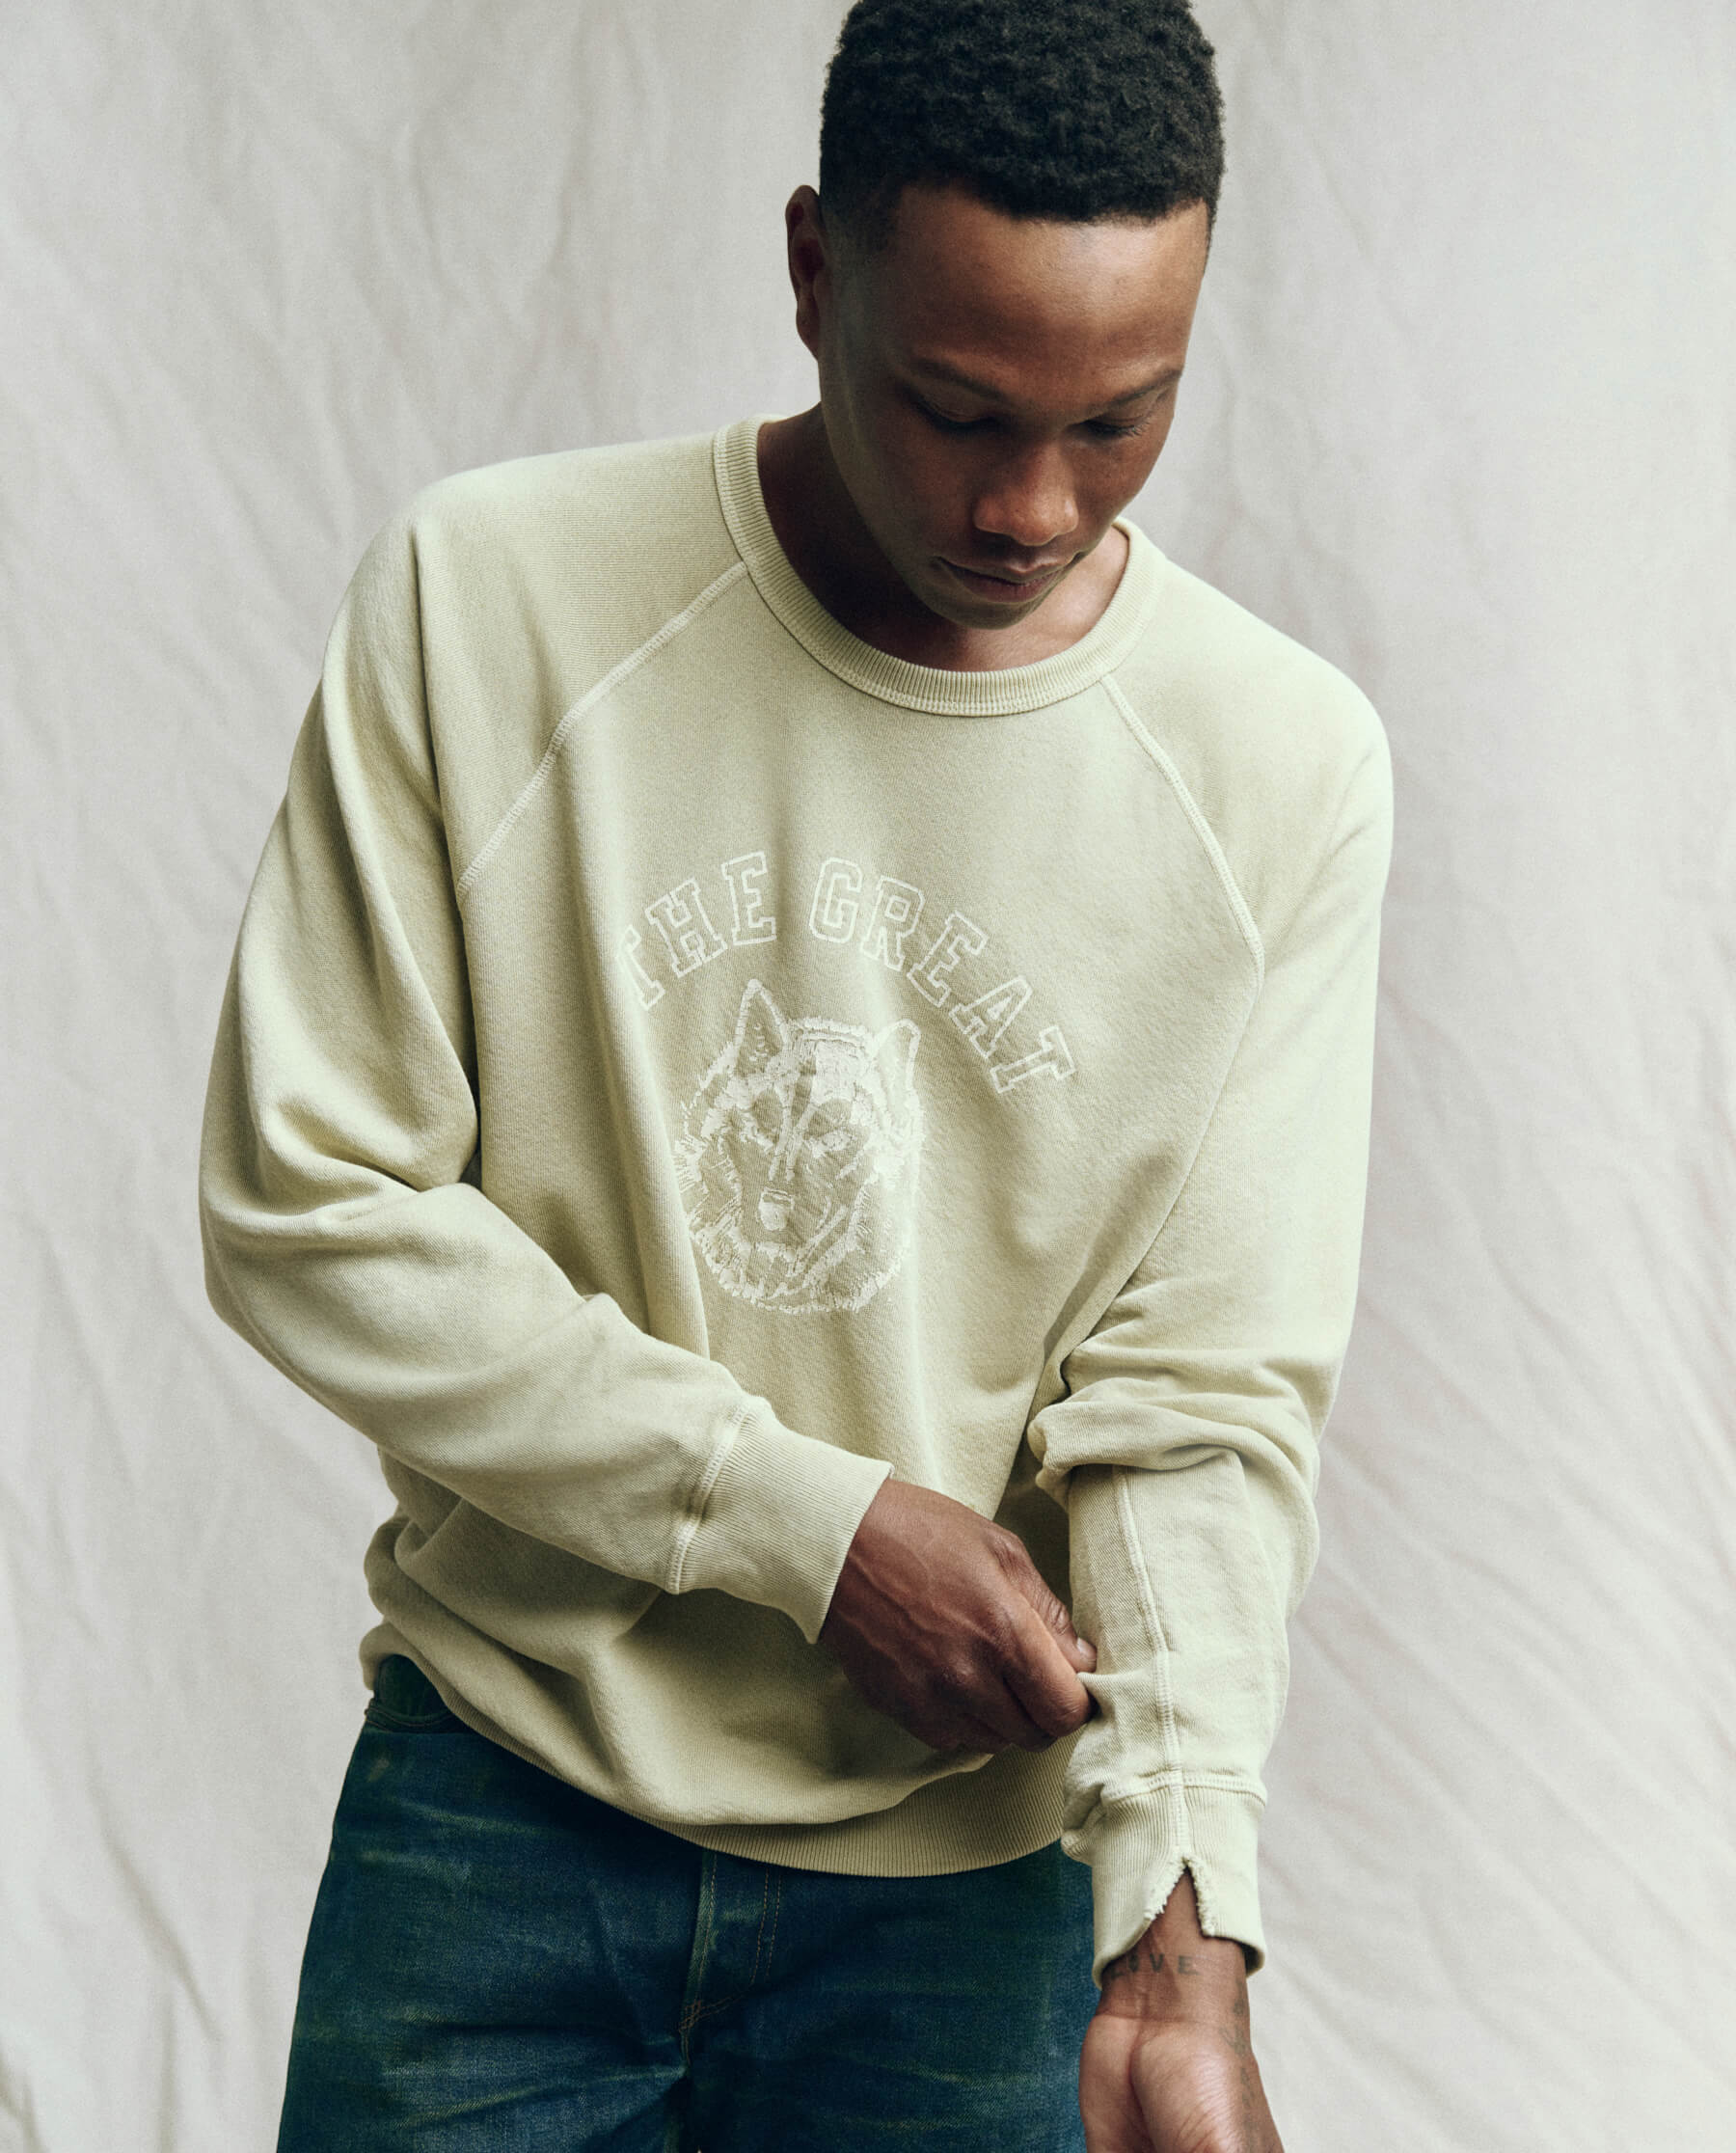 The Men's College Sweatshirt. -- Dusty Sweetgrass with Field Wolf Graphic